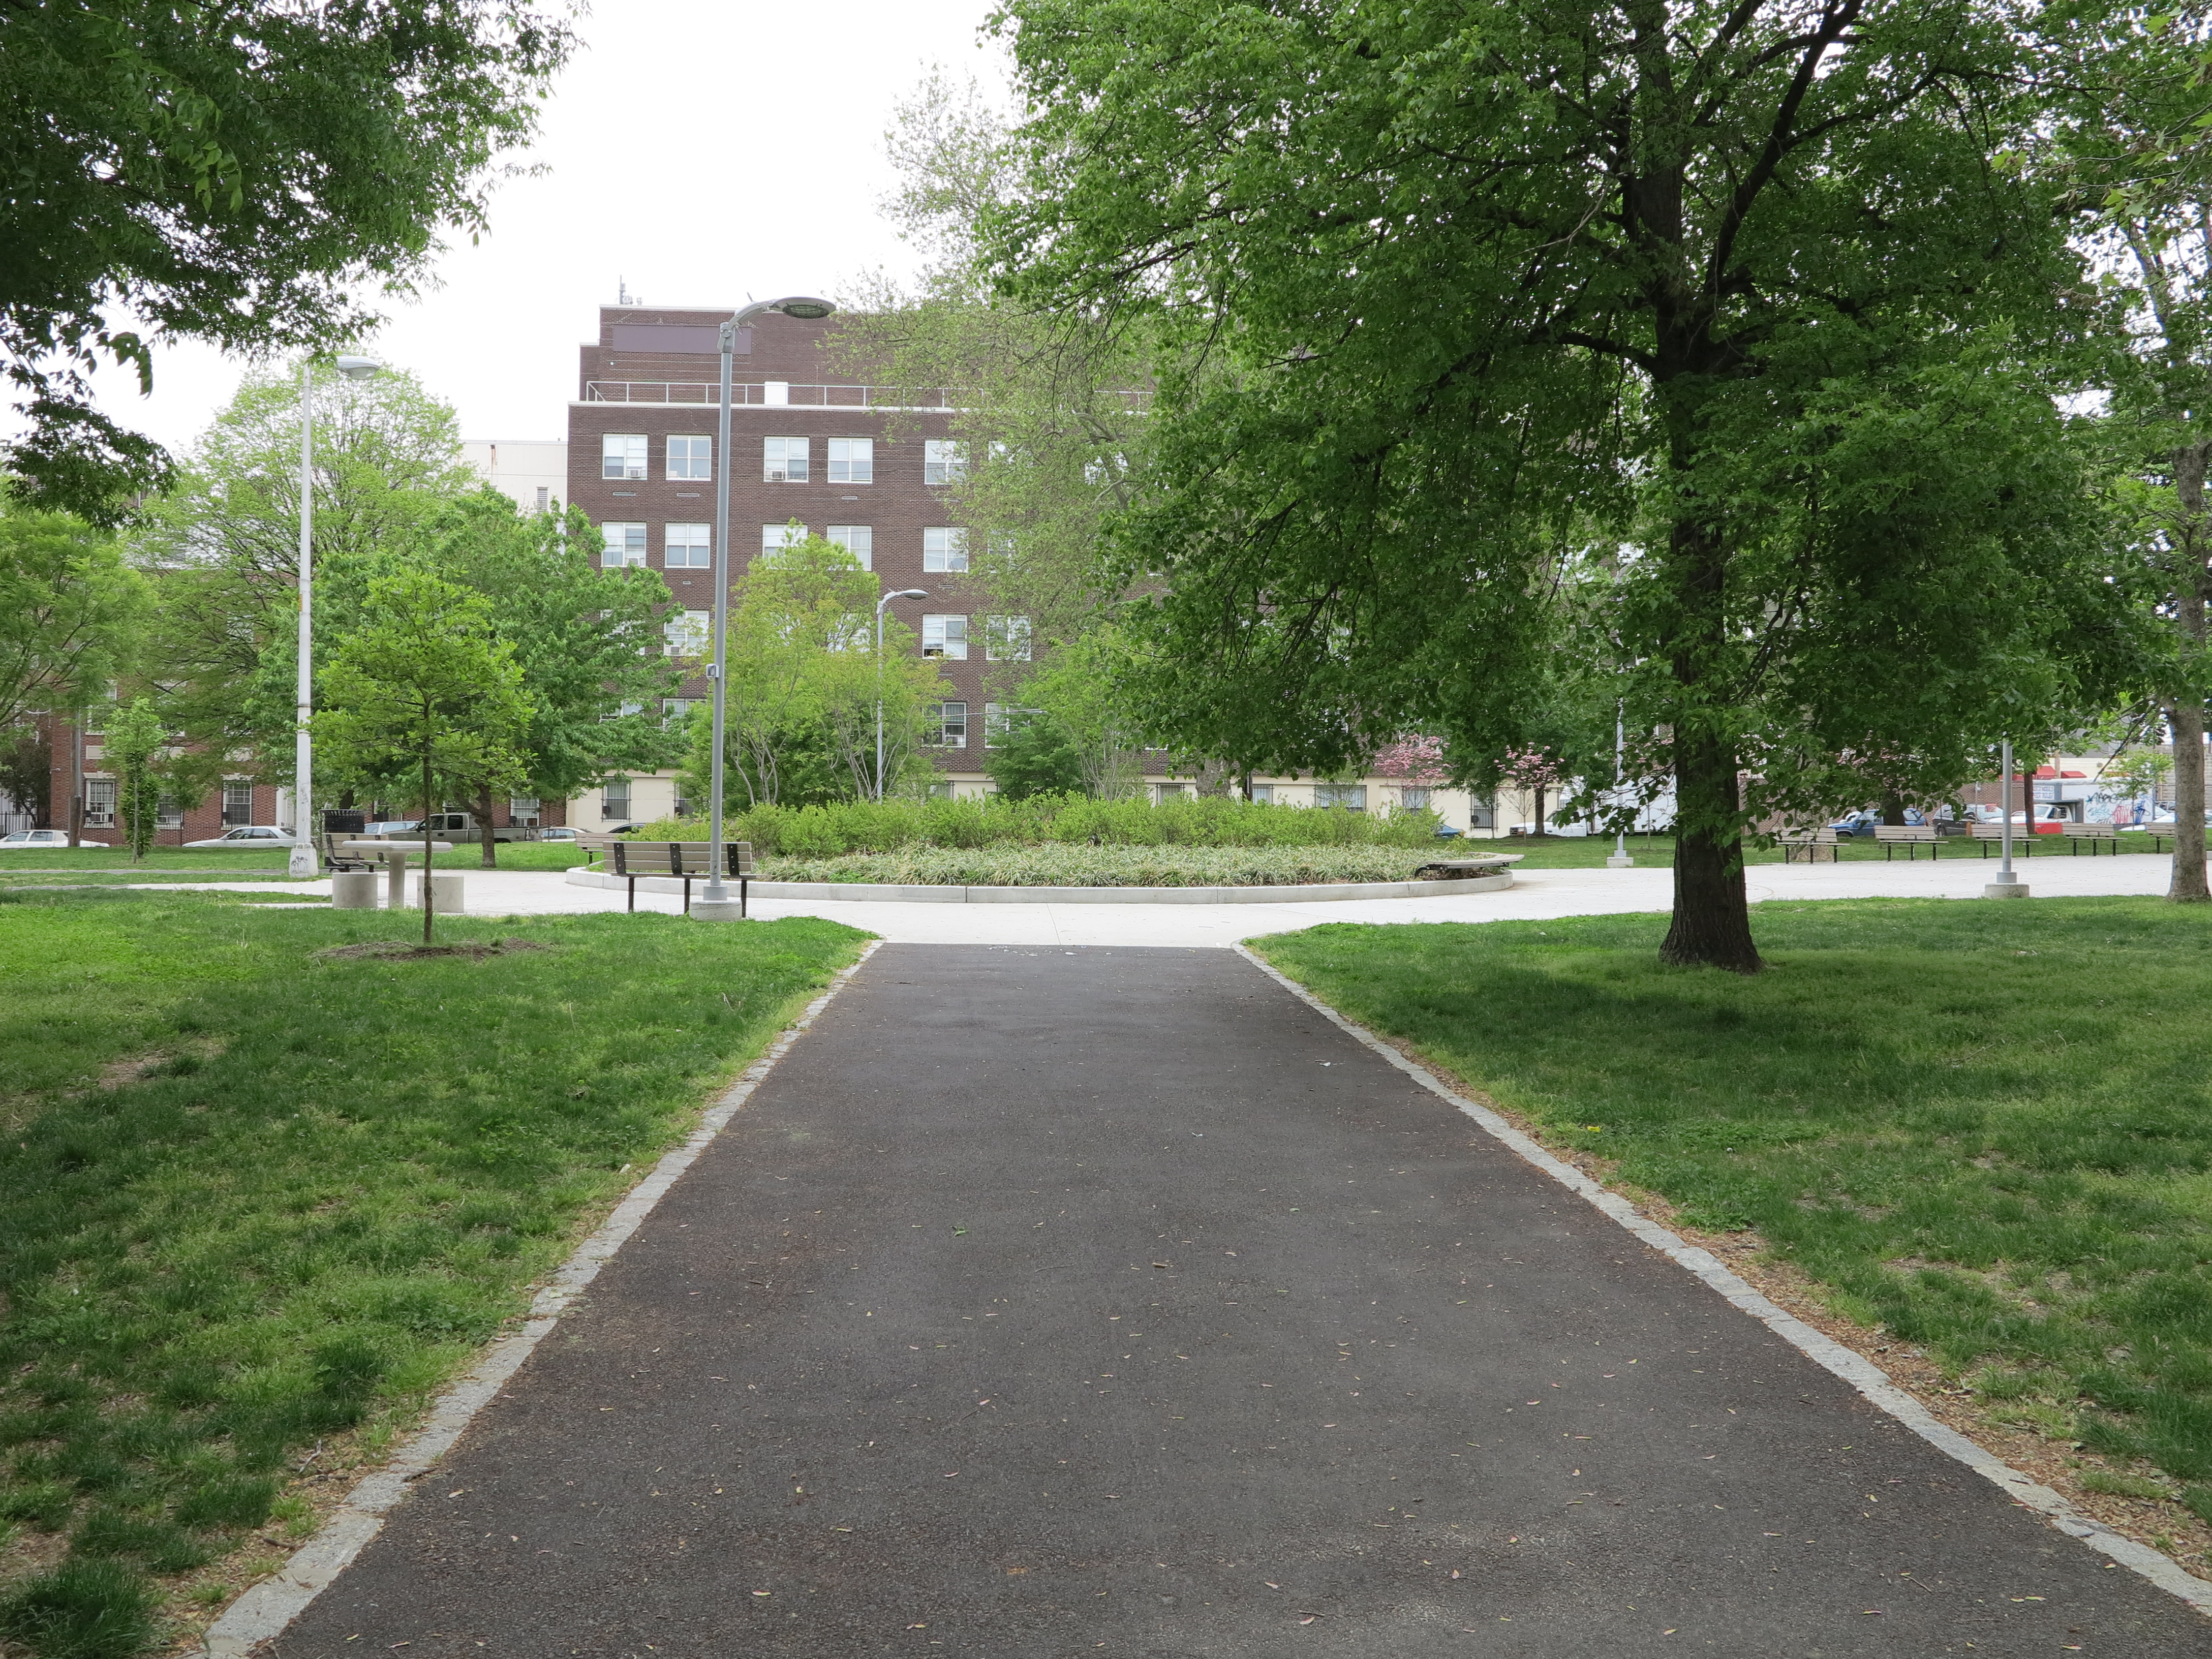 New walkways and central plantings in Fairhill Square